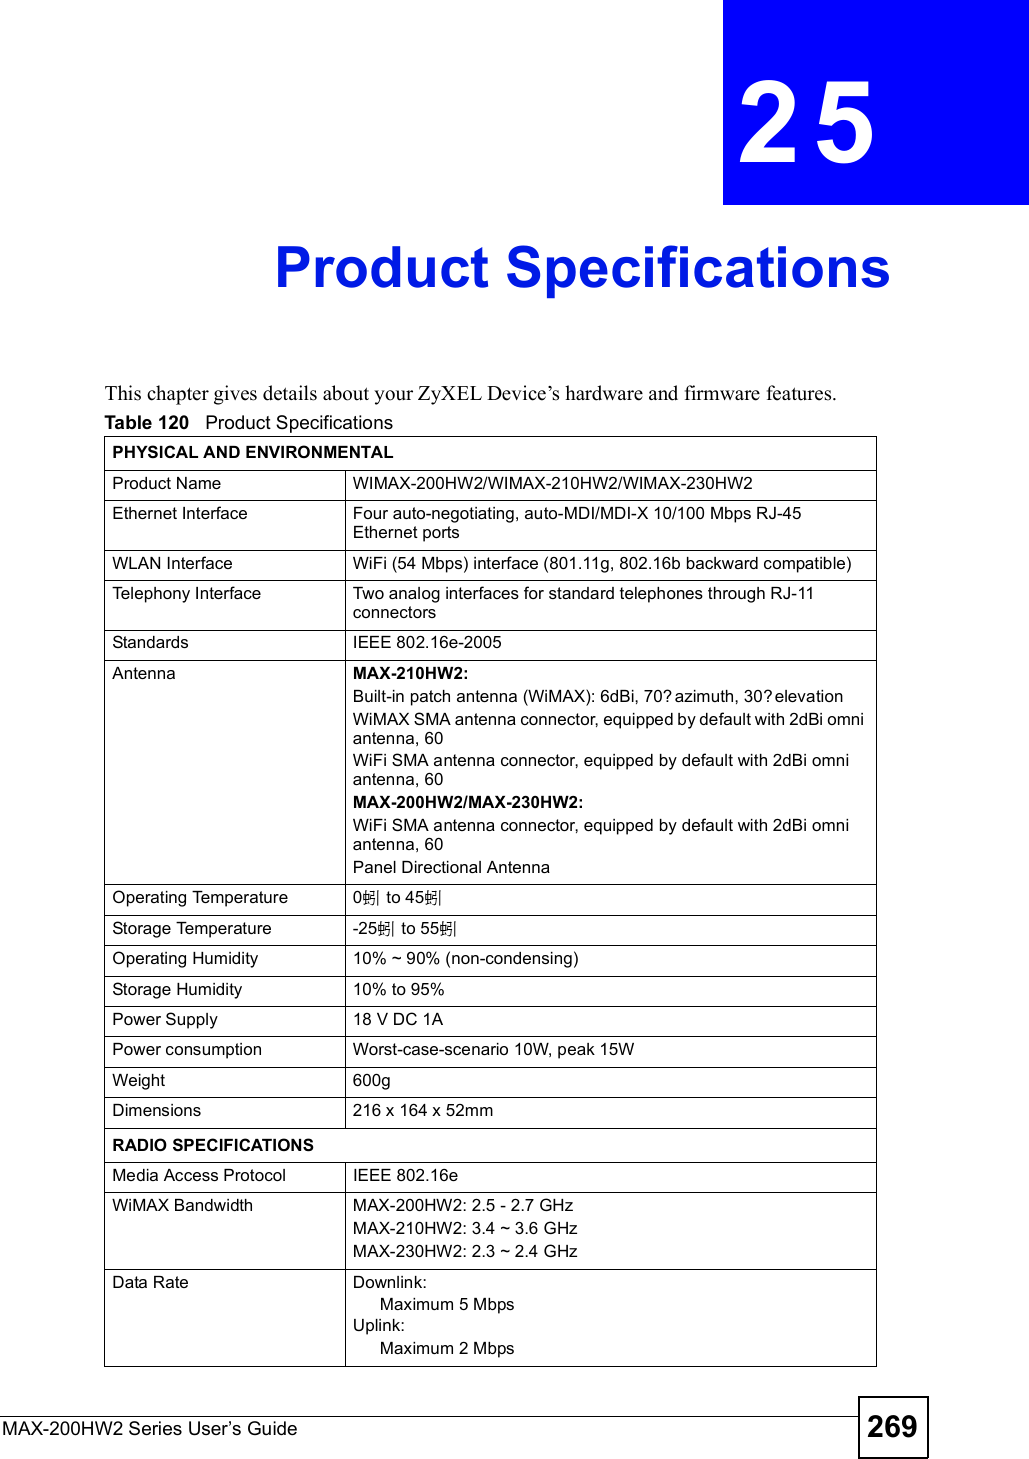 MAX-200HW2 Series User s Guide 269CHAPTER 25Product SpecificationsThis chapter gives details about your ZyXEL Device!s hardware and firmware features.Table 120   Product SpecificationsPHYSICAL AND ENVIRONMENTALProduct Name WIMAX-200HW2/WIMAX-210HW2/WIMAX-230HW2Ethernet InterfaceFour auto-negotiating, auto-MDI/MDI-X 10/100 Mbps RJ-45 Ethernet portsWLAN InterfaceWiFi (54 Mbps) interface (801.11g, 802.16b backward compatible)Telephony InterfaceTwo analog interfaces for standard telephones through RJ-11 connectorsStandardsIEEE 802.16e-2005Antenna MAX-210HW2:Built-in patch antenna (WiMAX): 6dBi, 70?azimuth, 30?elevationWiMAX SMA antenna connector, equipped by default with 2dBi omni antenna, 60 WiFi SMA antenna connector, equipped by default with 2dBi omni antenna, 60 MAX-200HW2/MAX-230HW2: WiFi SMA antenna connector, equipped by default with 2dBi omni antenna, 60 Panel Directional AntennaOperating Temperature 0蚓 to 45蚓Storage Temperature -25蚓 to 55蚓Operating Humidity10% ~ 90% (non-condensing)Storage Humidity 10% to 95%Power Supply18 V DC 1APower consumptionWorst-case-scenario 10W, peak 15WWeight600gDimensions216 x 164 x 52mmRADIO SPECIFICATIONSMedia Access ProtocolIEEE 802.16eWiMAX BandwidthMAX-200HW2: 2.5 - 2.7 GHzMAX-210HW2: 3.4 ~ 3.6 GHzMAX-230HW2: 2.3 ~ 2.4 GHzData RateDownlink:Maximum 5 MbpsUplink:Maximum 2 Mbps